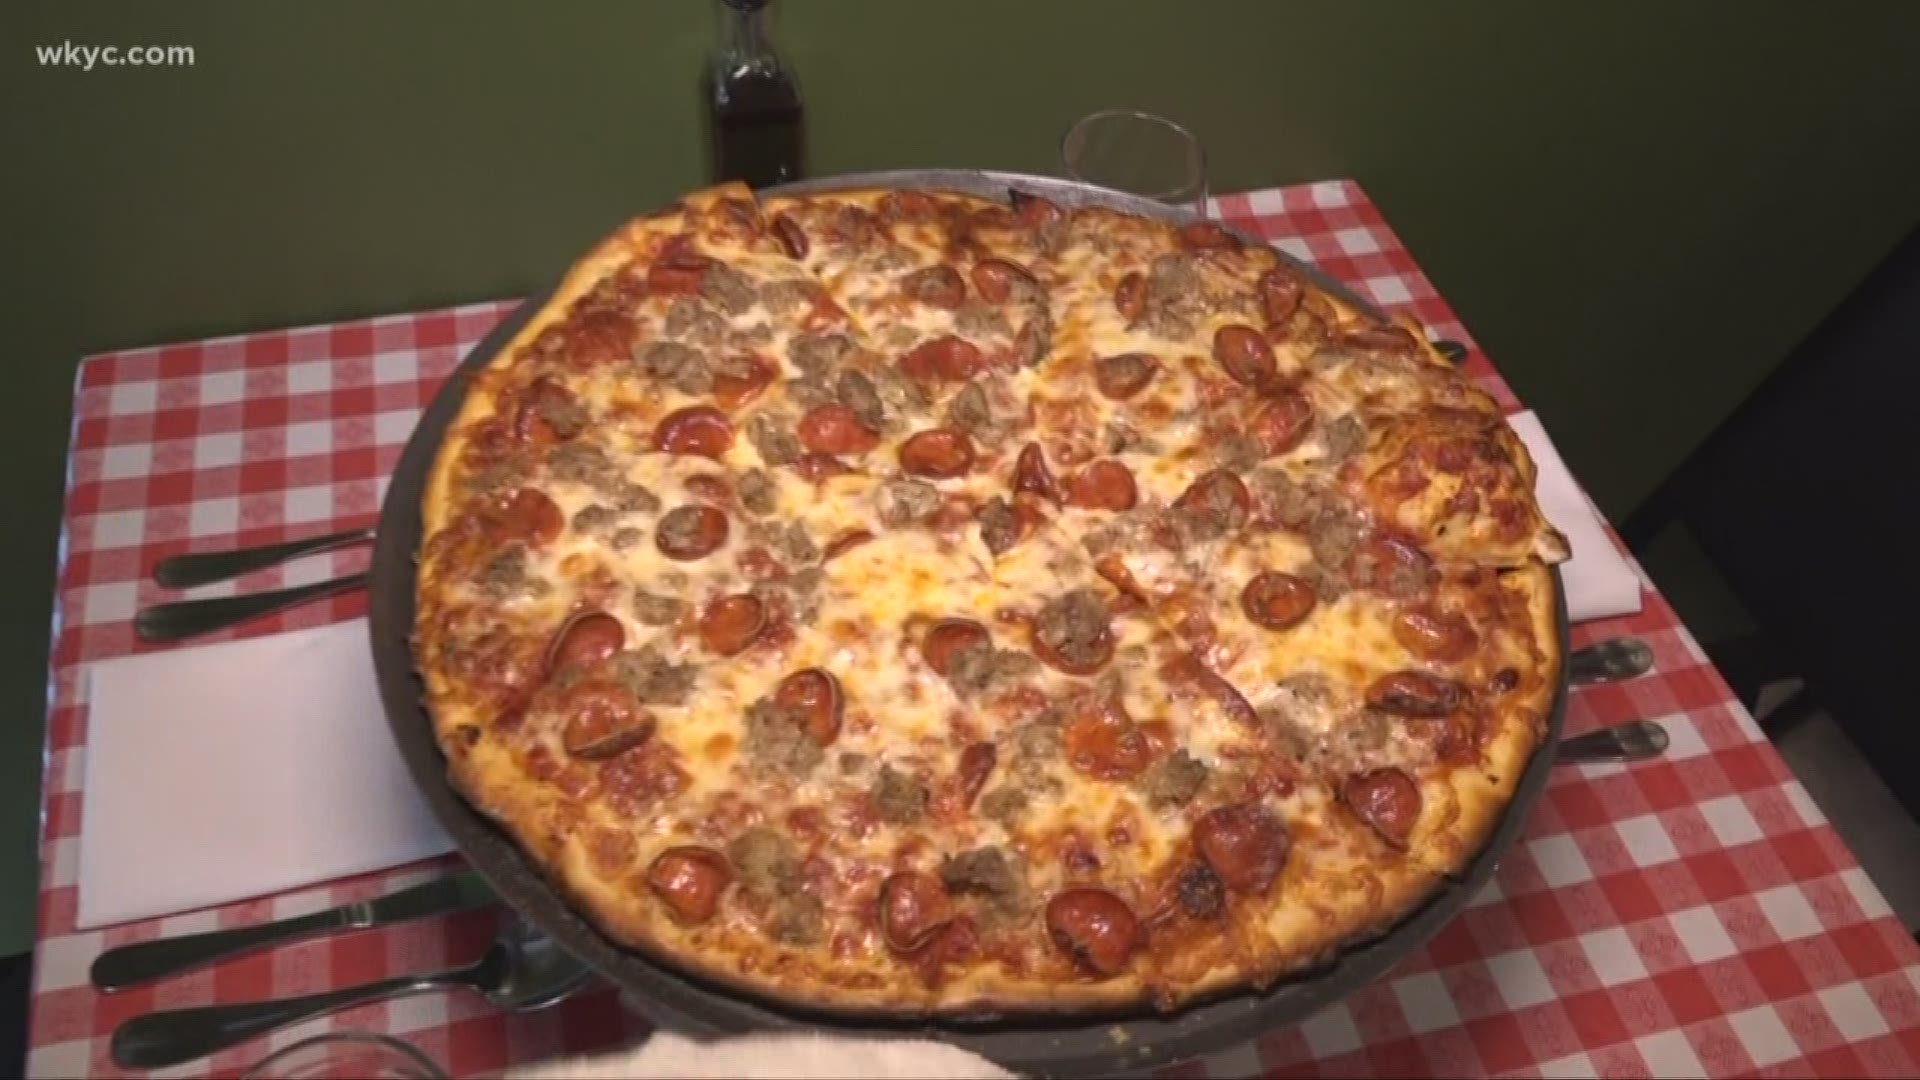 July 18, 2019: This place is all about second chances. WKYC's Jasmine Monroe explores the reopening of Ohio City Pizzeria, which returns with a special mission.